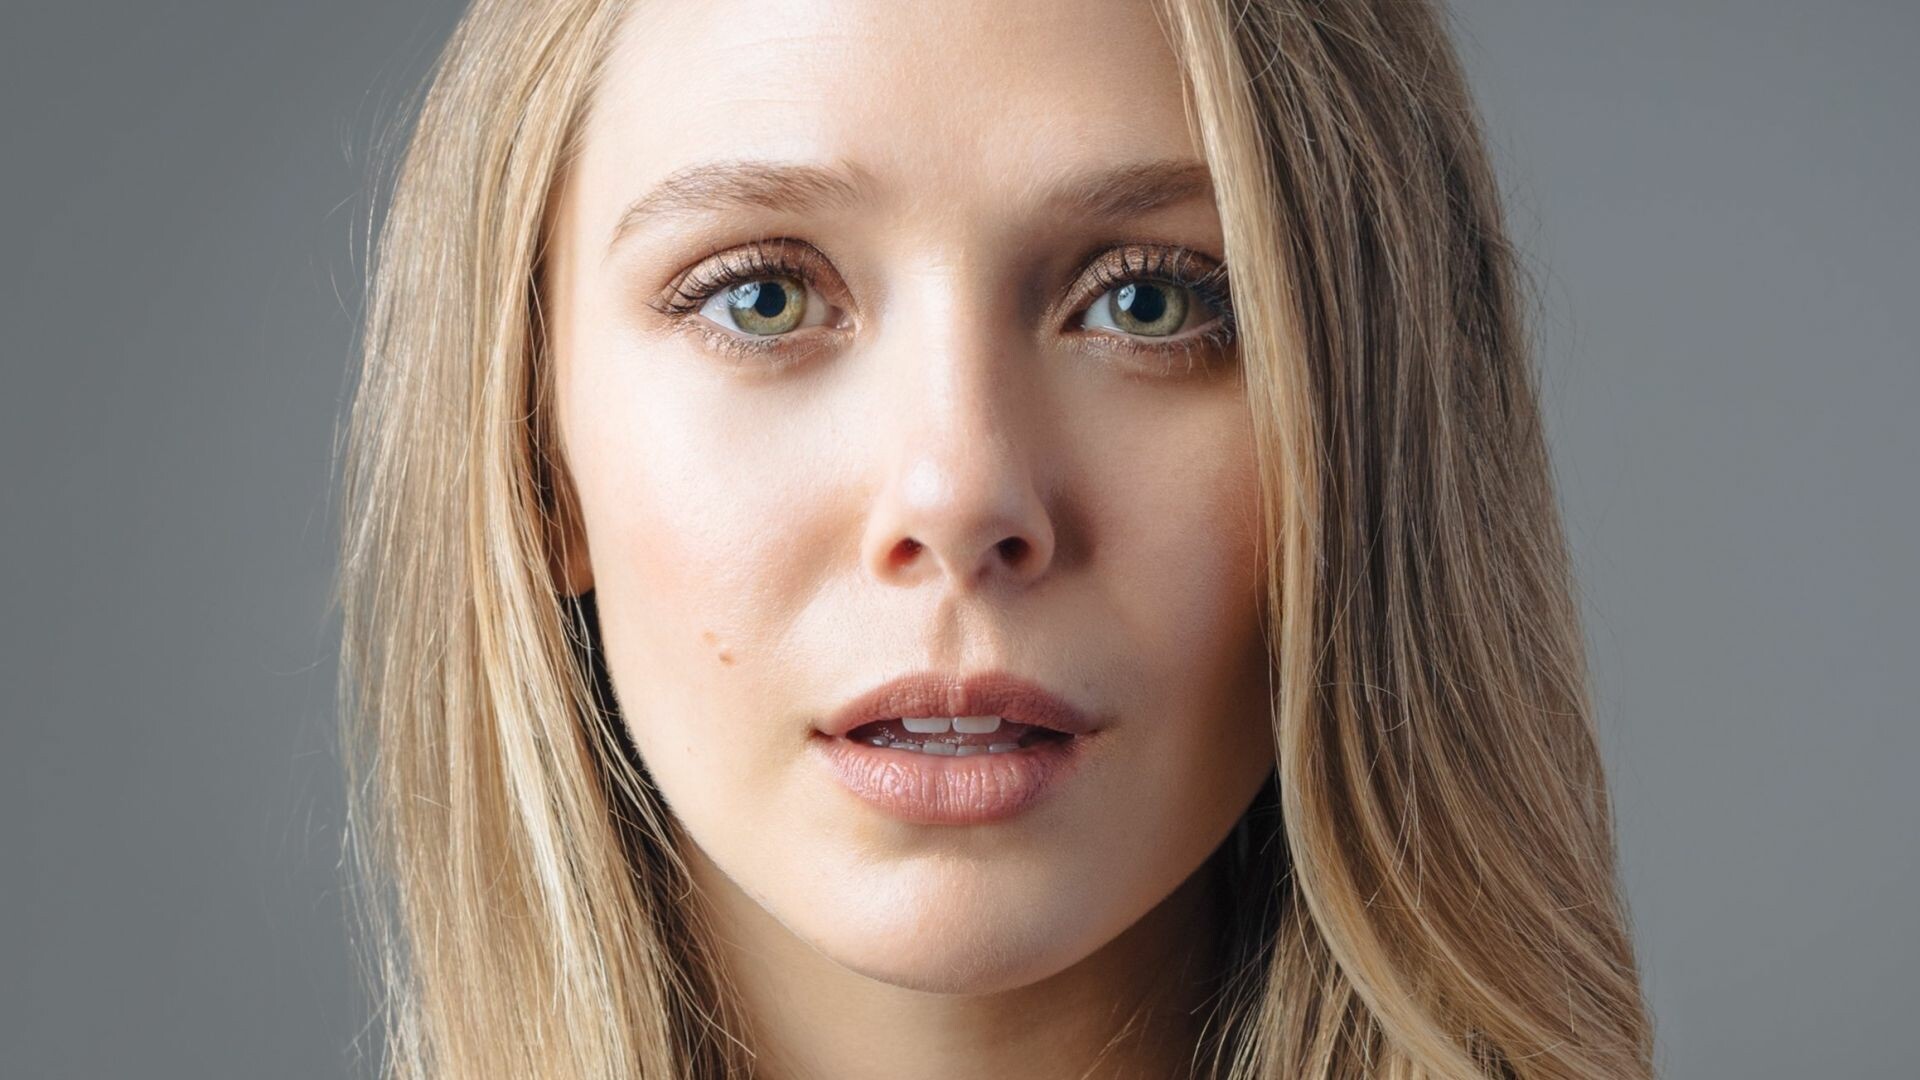 Elizabeth Olsen: The leading role, In Secret, a film adaptation of Emile Zola's 1867 novel Therese Raquin. 1920x1080 Full HD Background.